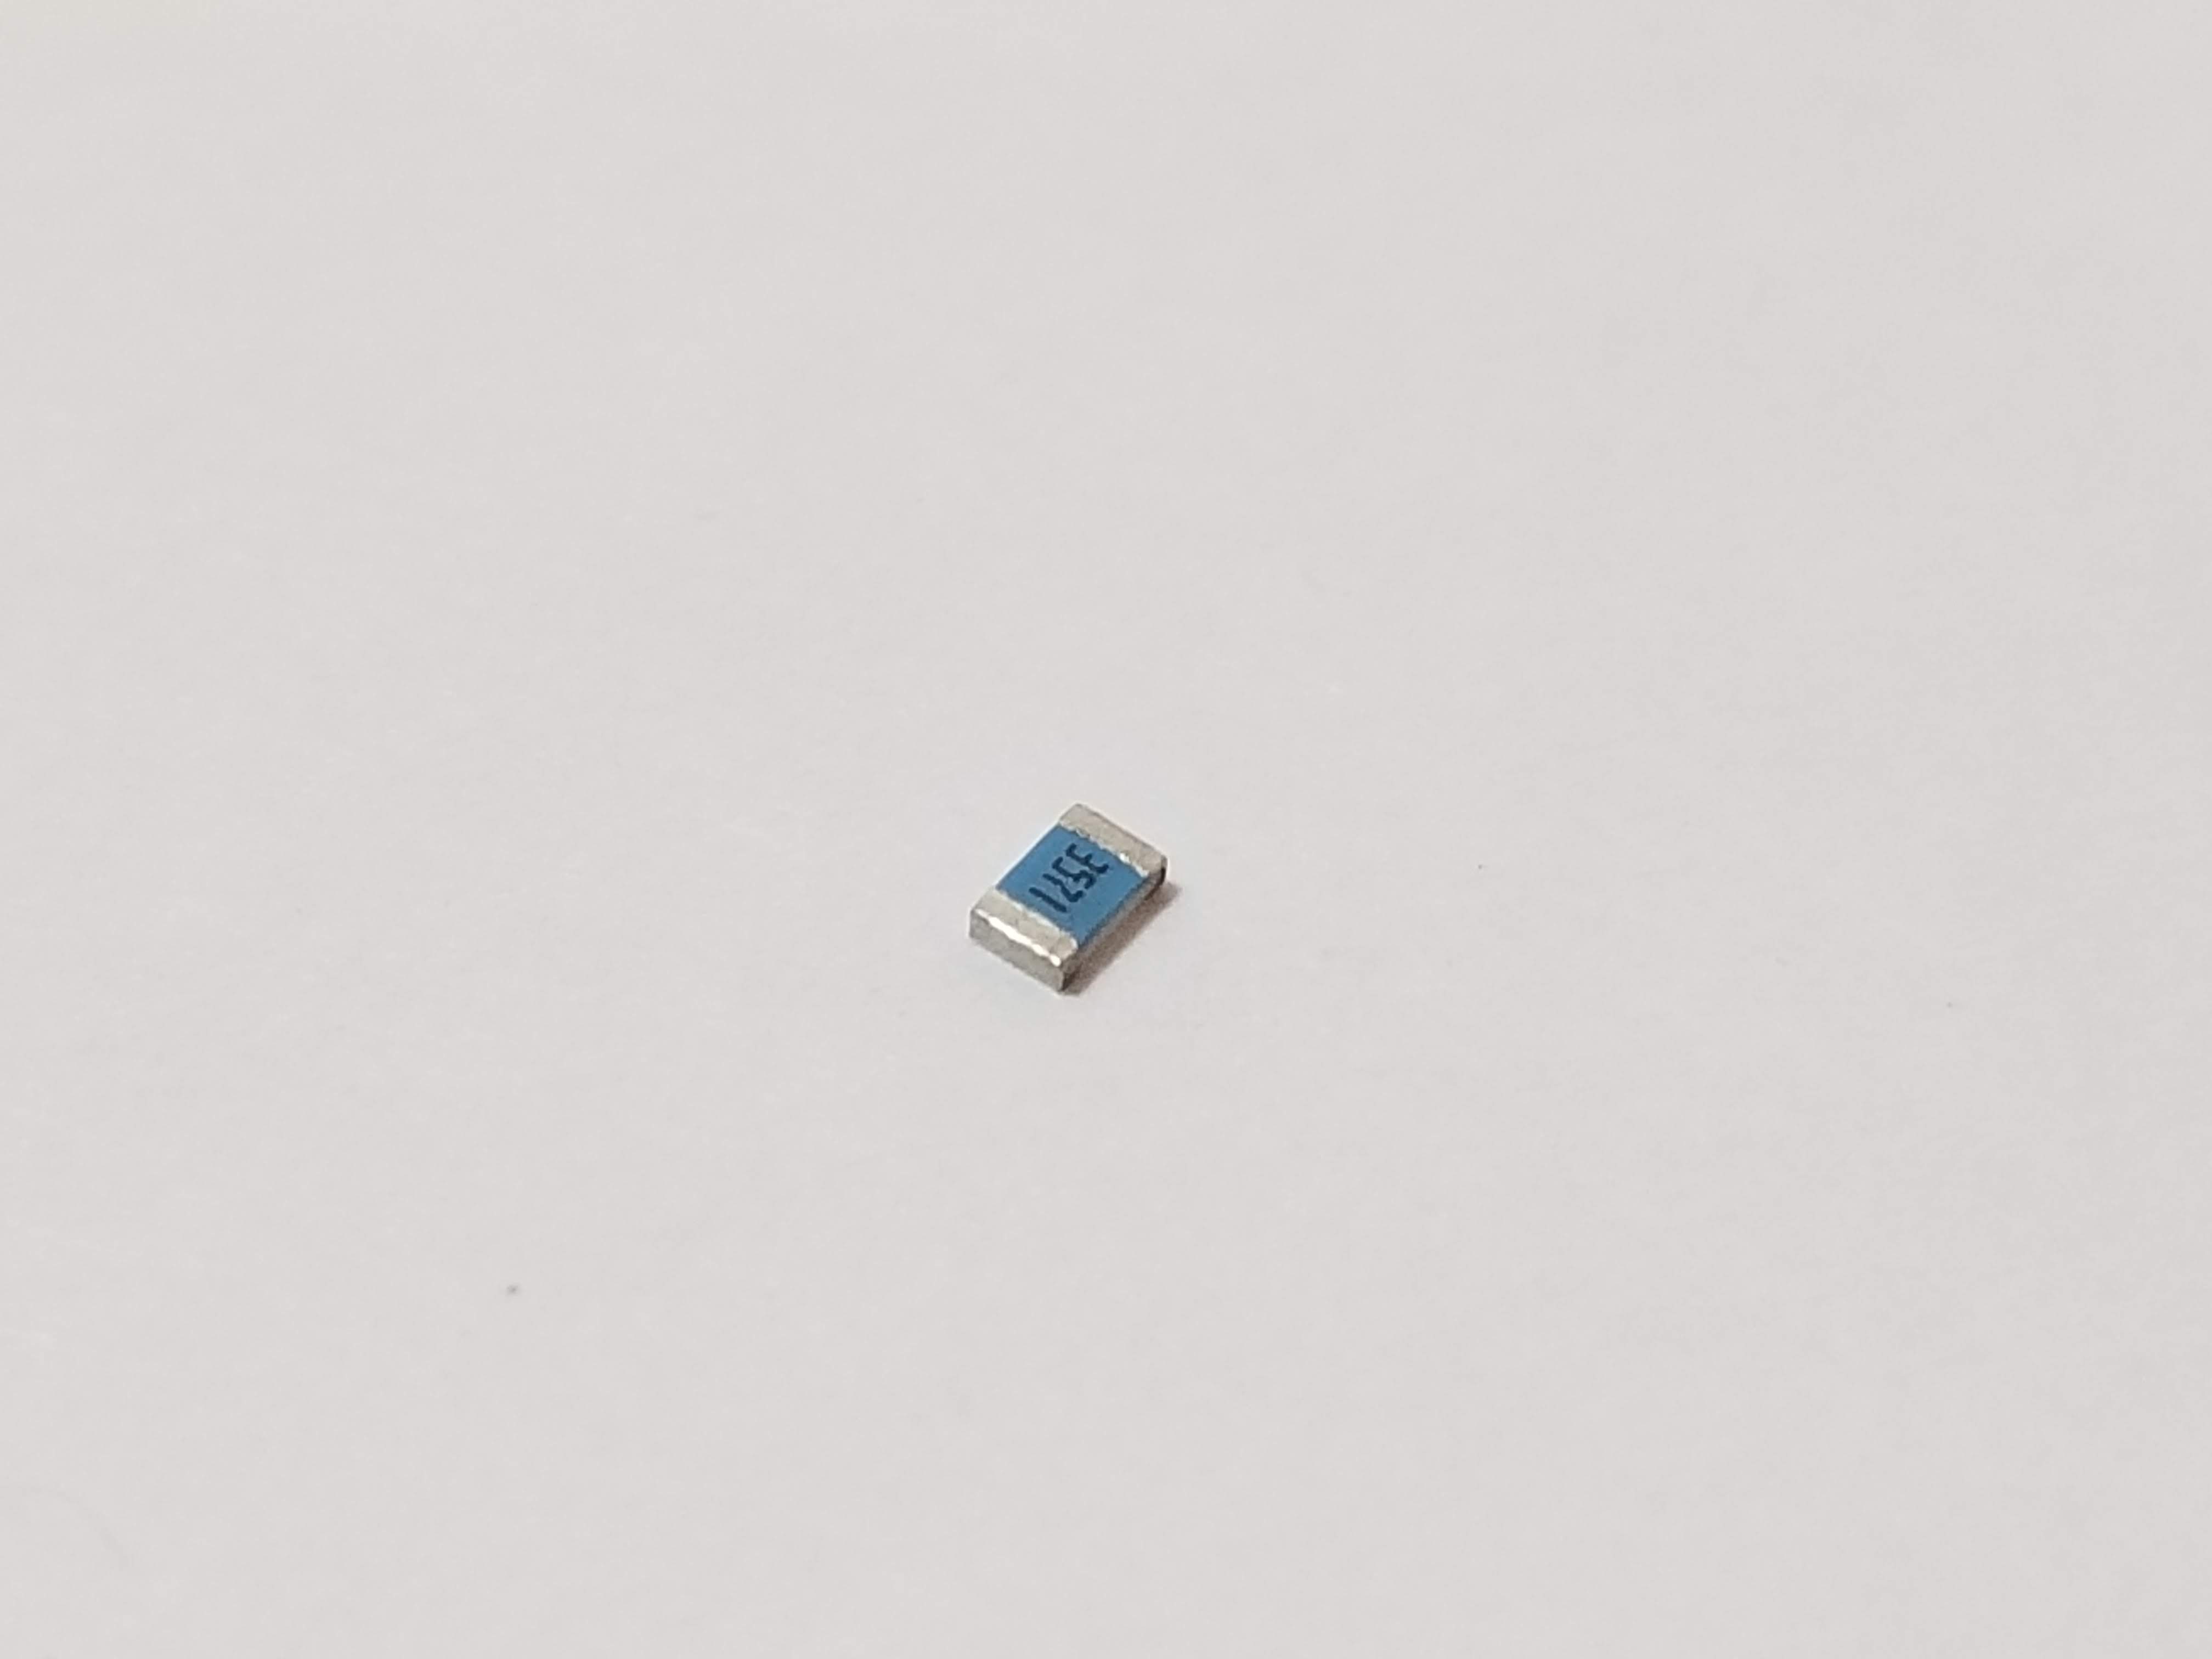 Picture of 402k Ohm Resistor 1% 0805